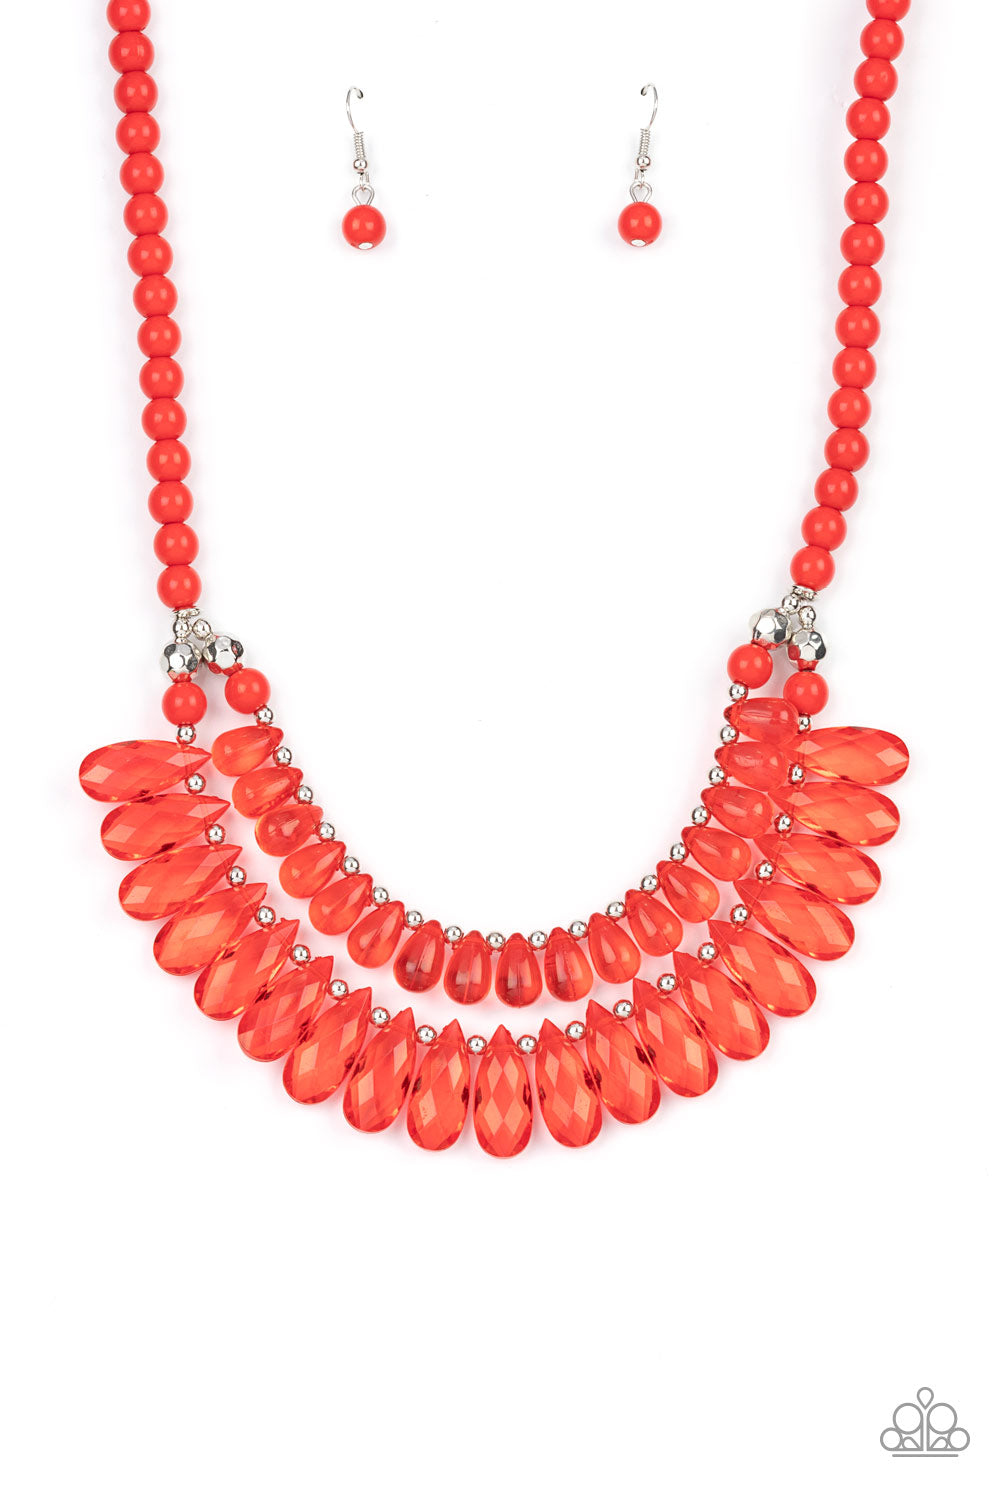 All Across the GLOBETROTTER - Red Necklace